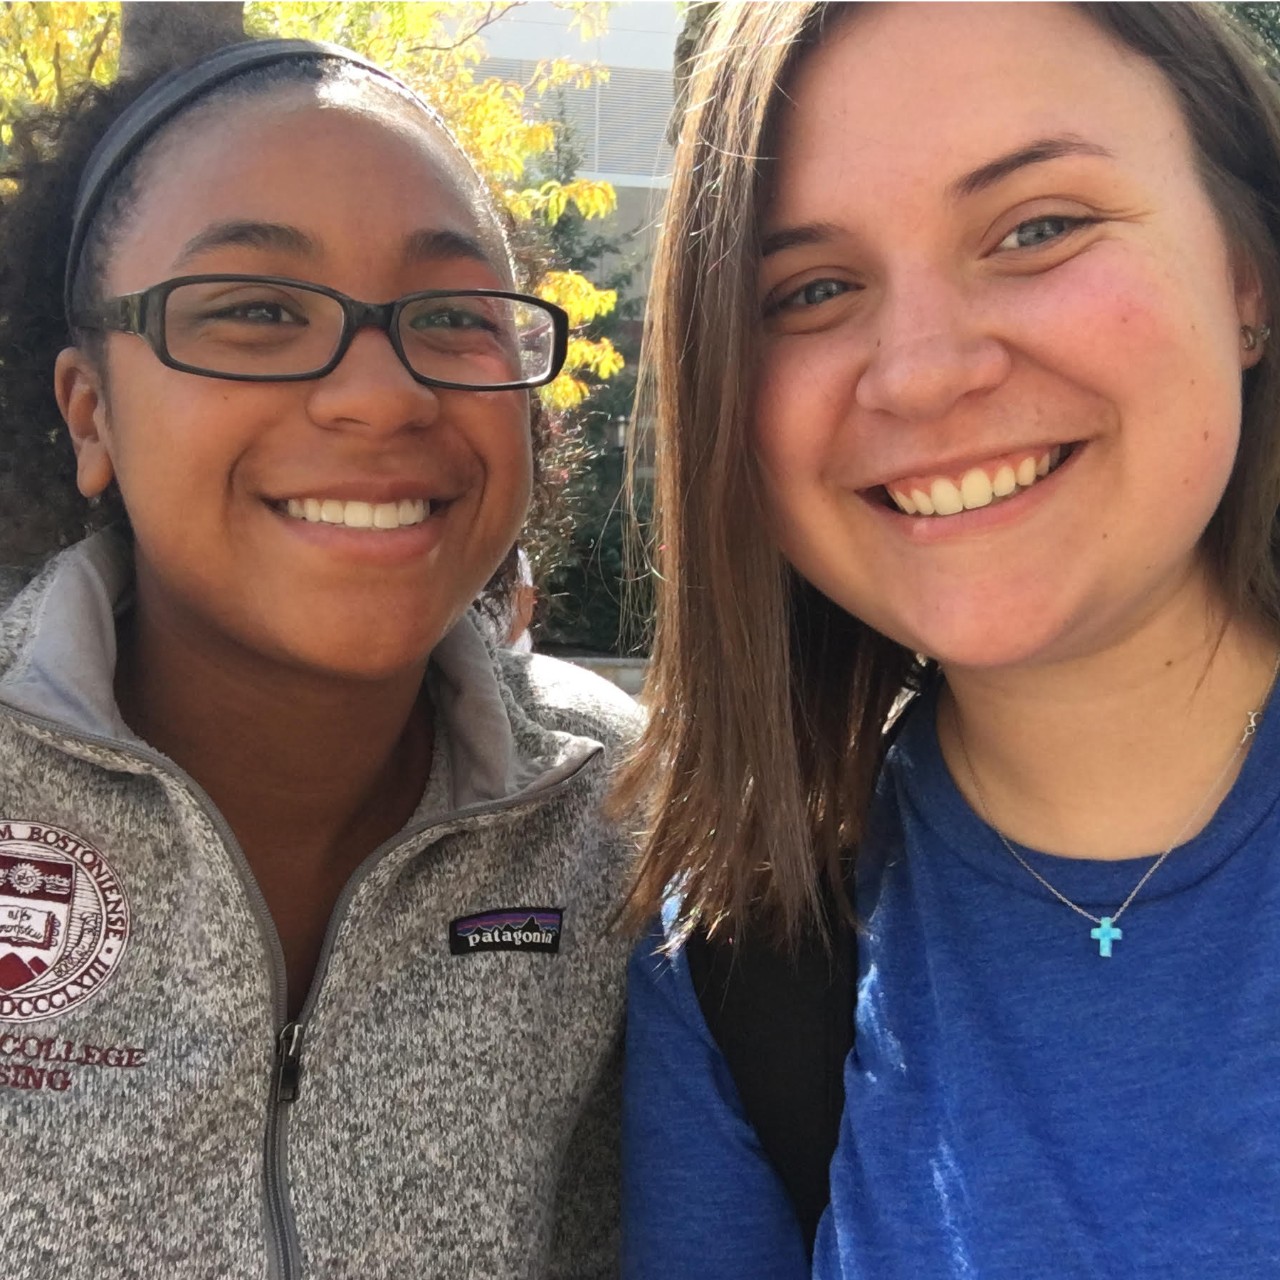 First-year seminar students submit selfies each week to show that she or he got together with another student to study or socialize.